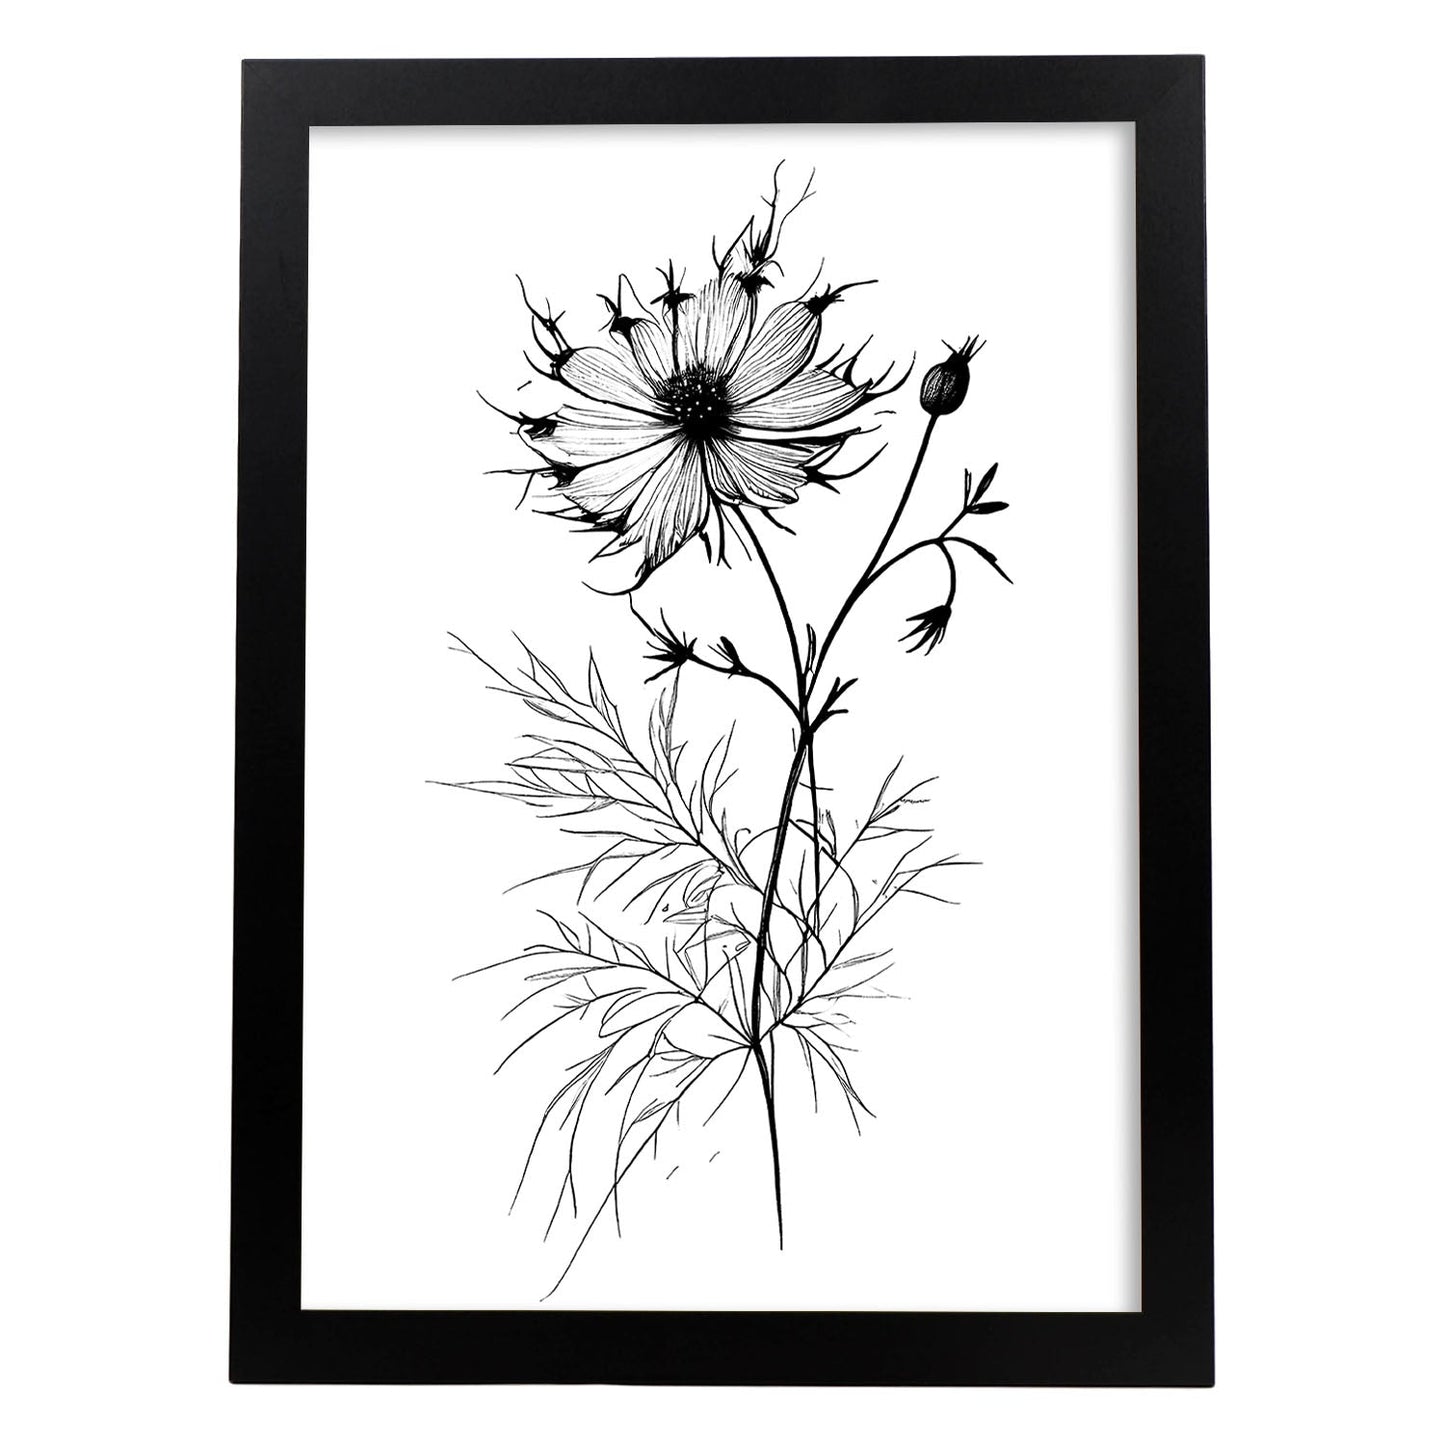 Nacnic Love-in-a-Mist Minimalist Line Art_3. Aesthetic Wall Art Prints for Bedroom or Living Room Design.